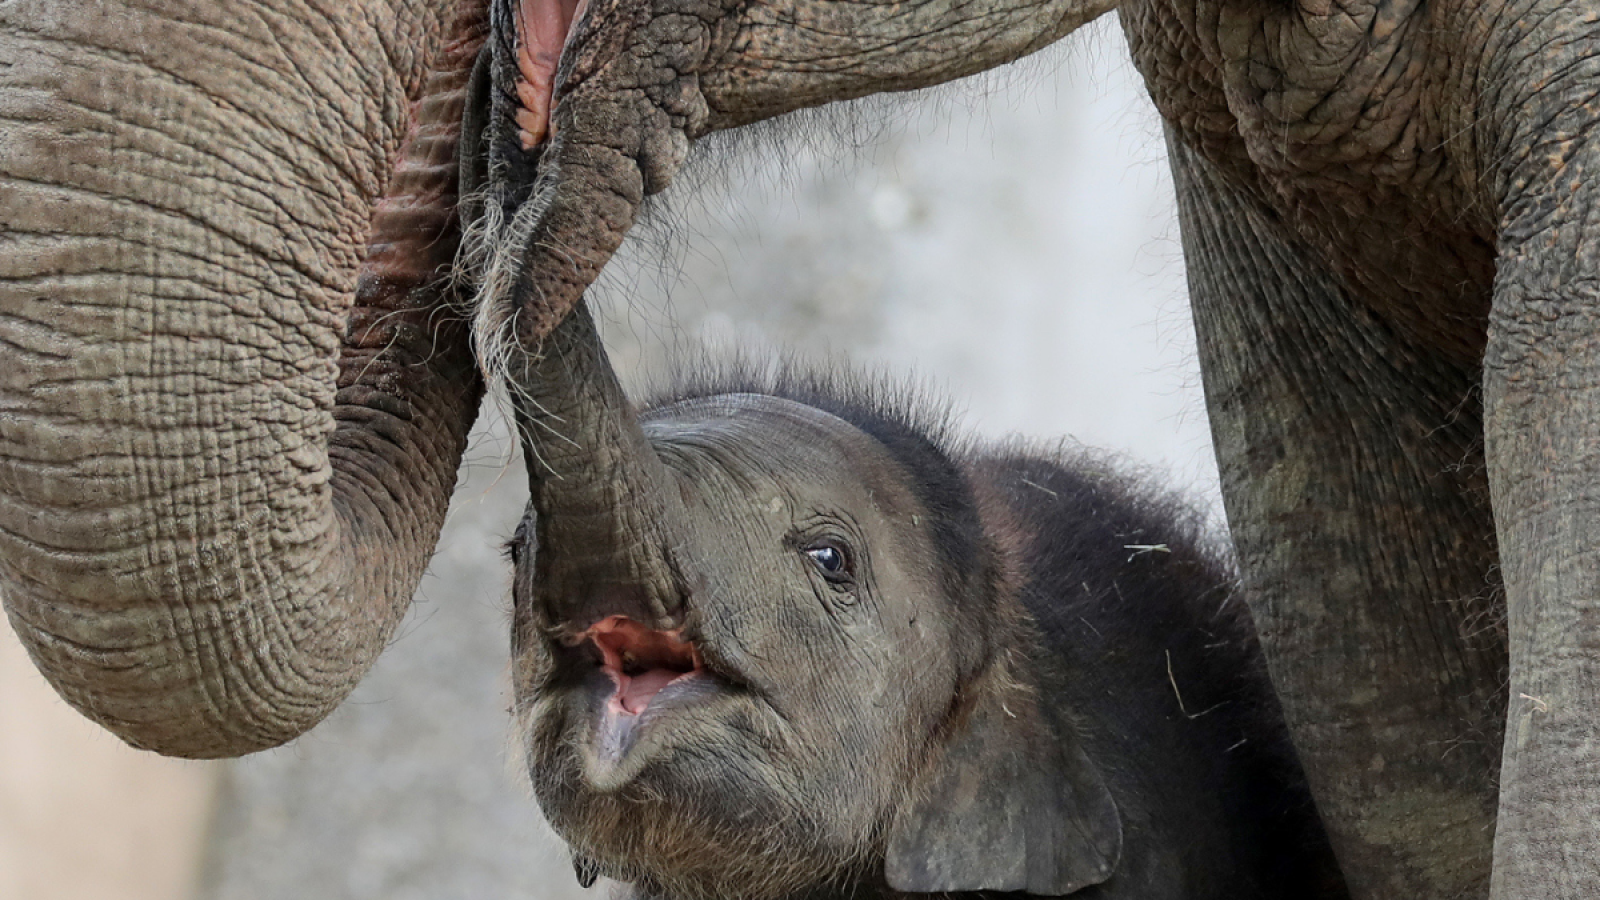 Baby Elephant Too Short to Drink From Mom Given Stool: 'Precious'